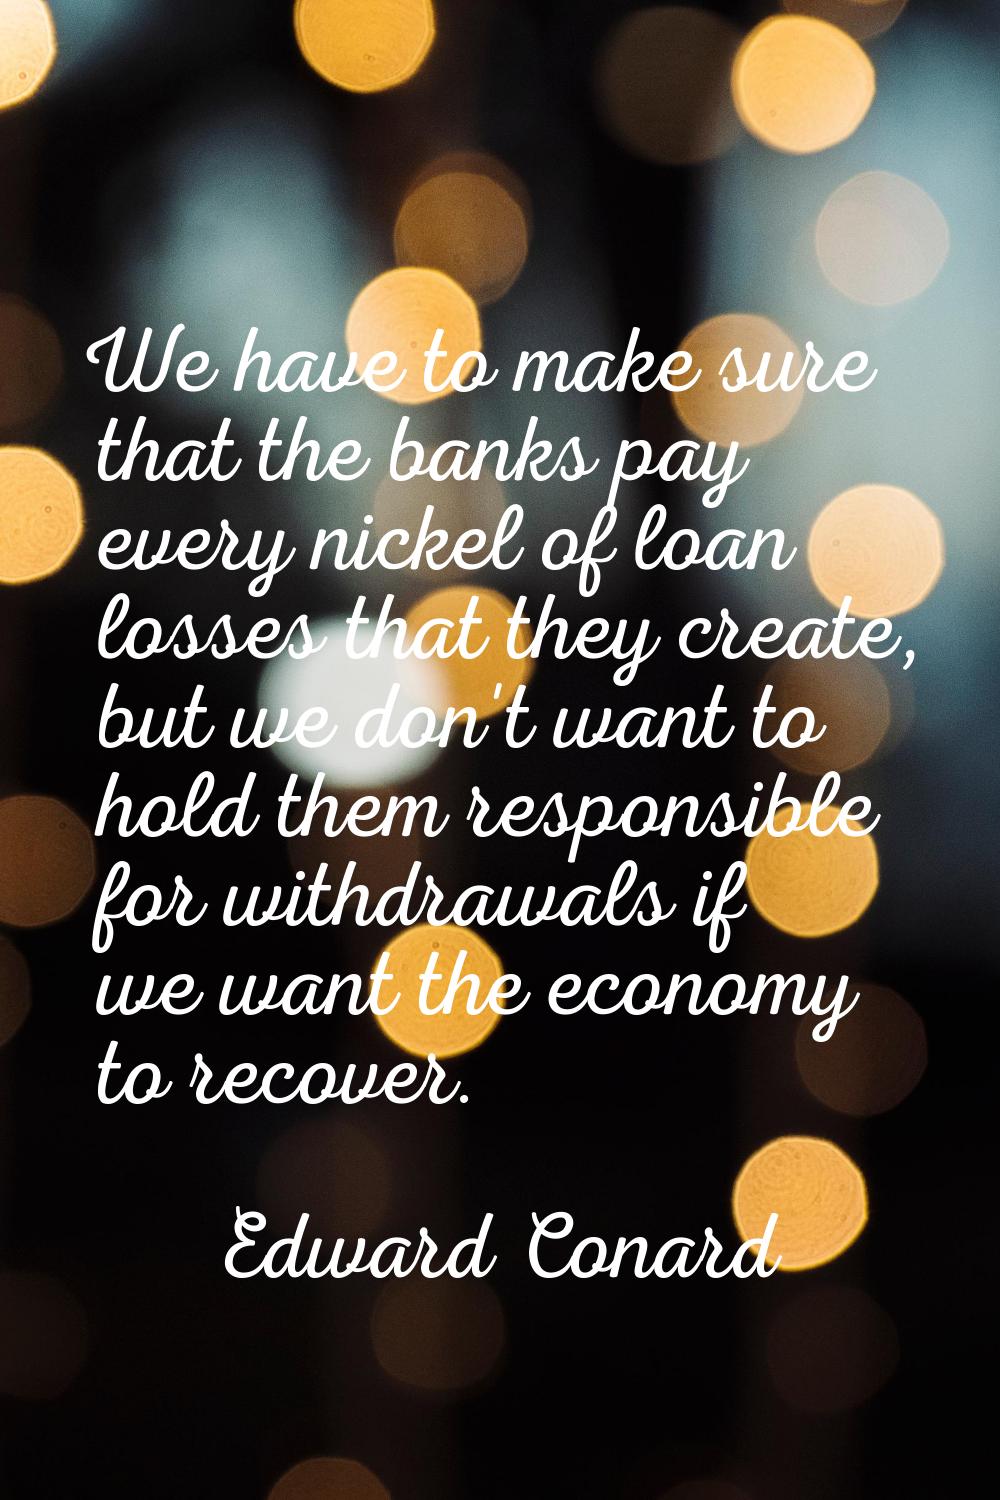 We have to make sure that the banks pay every nickel of loan losses that they create, but we don't 